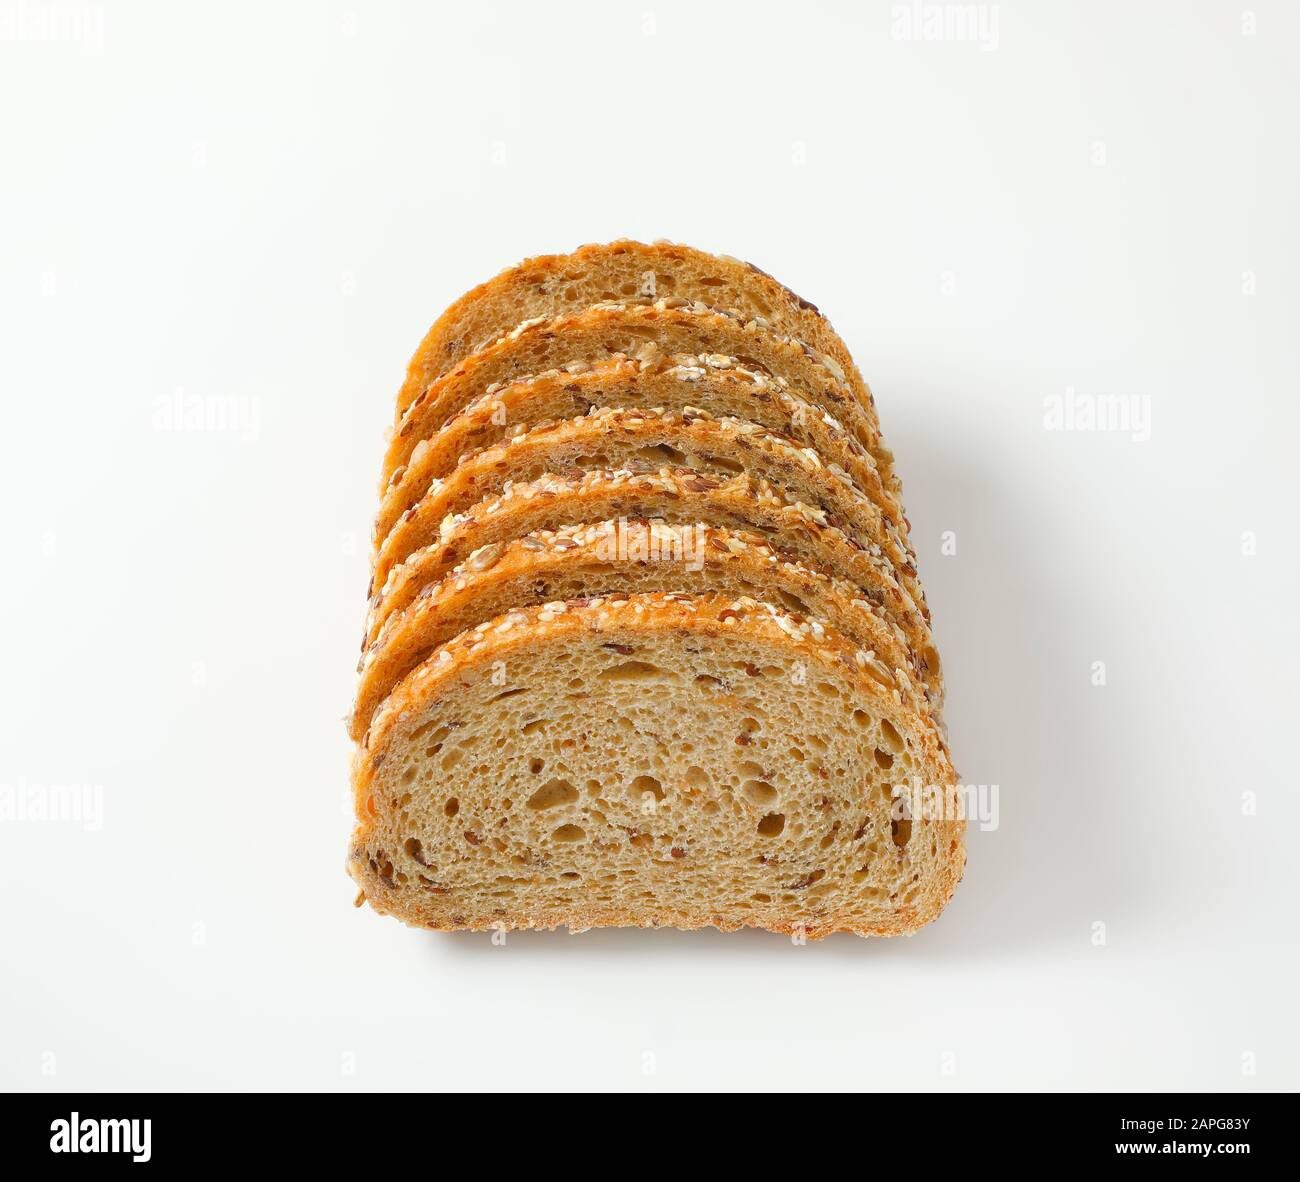 Sliced loaf of whole grain bread, crust topped with rolled oats and seeds (flax, sesame, sunflower) Stock Photo